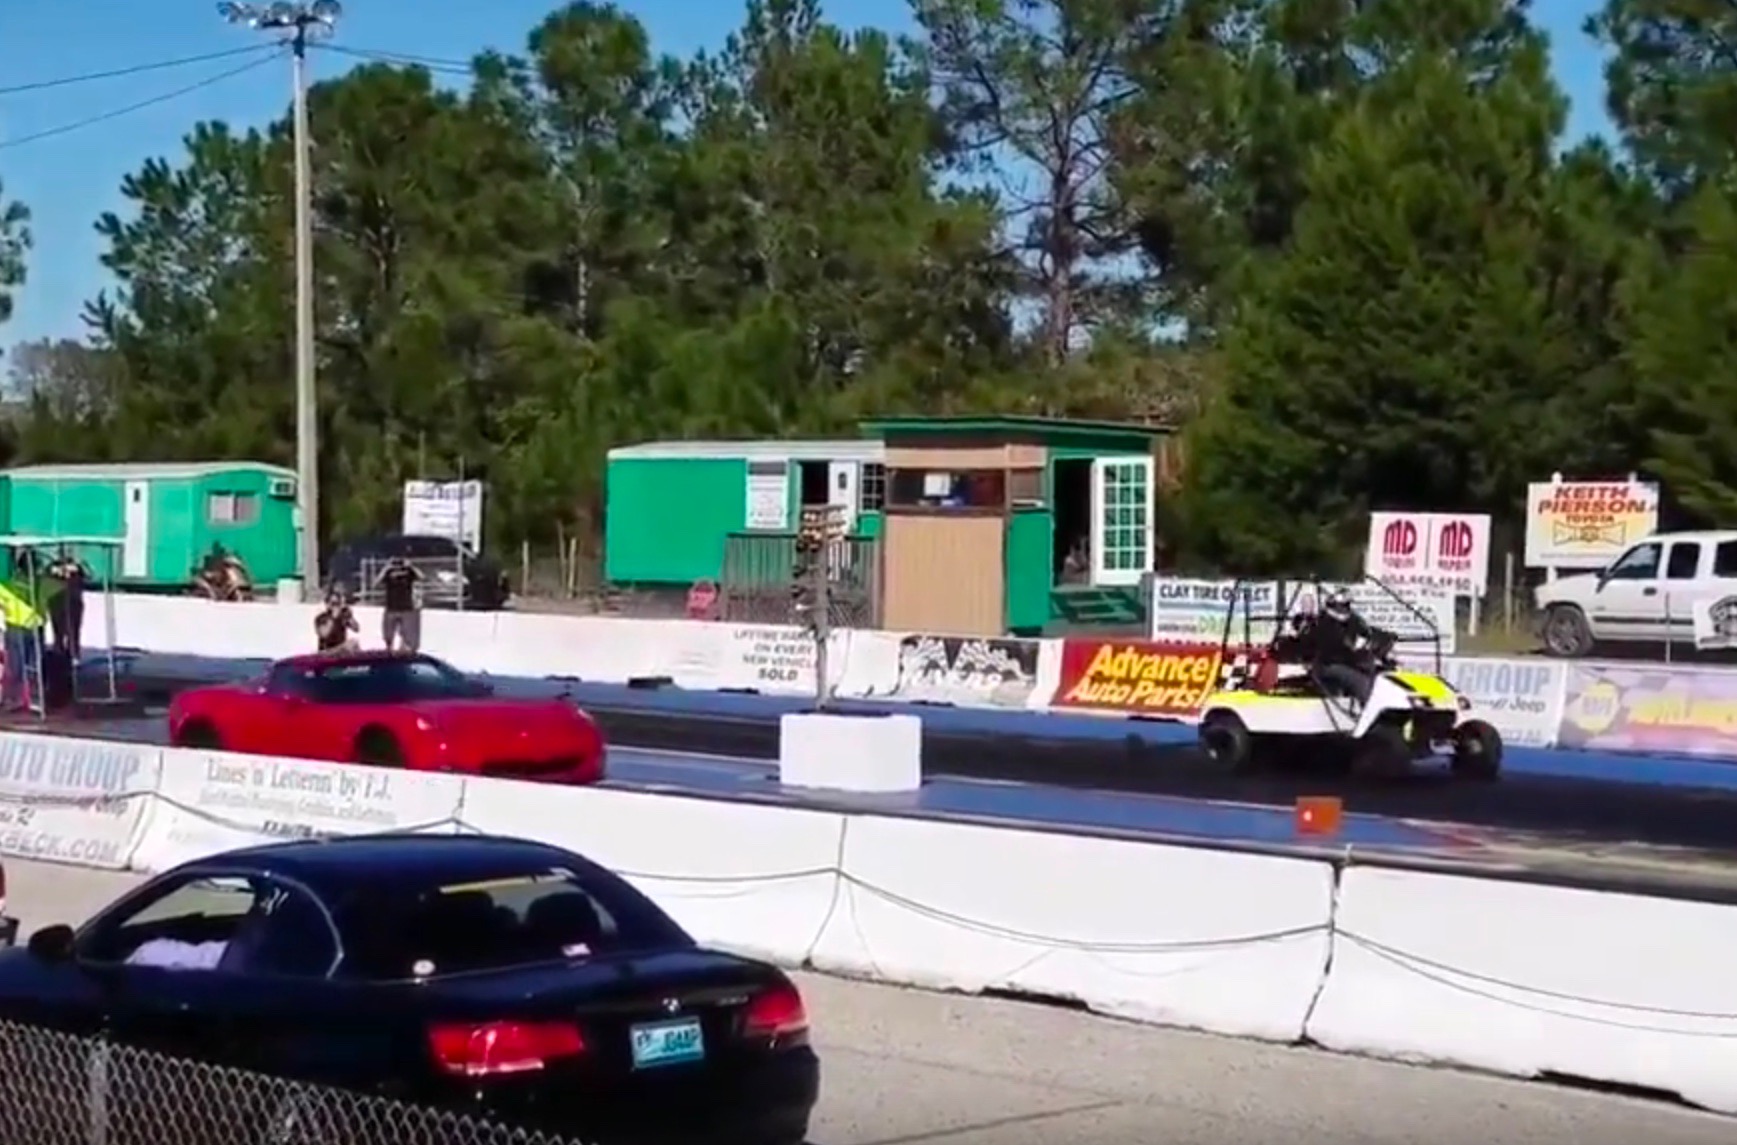 Video: Chevrolet Corvette supercharged to 1050hp vs golf cart in drag race